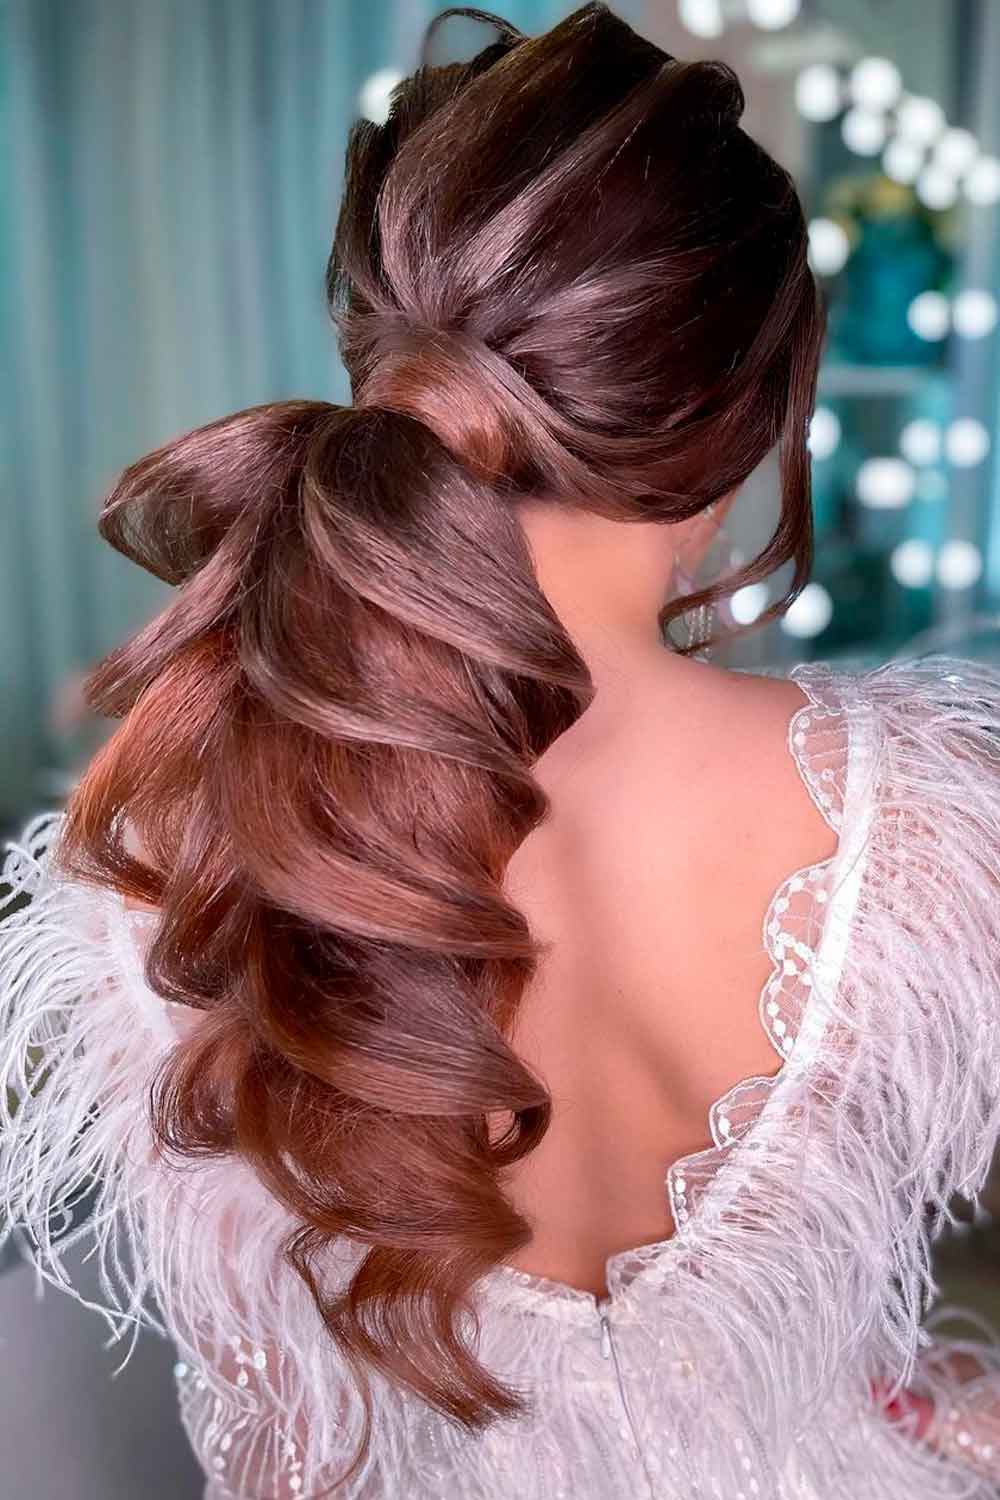 Ponytail Hairstyles For Prom Parties